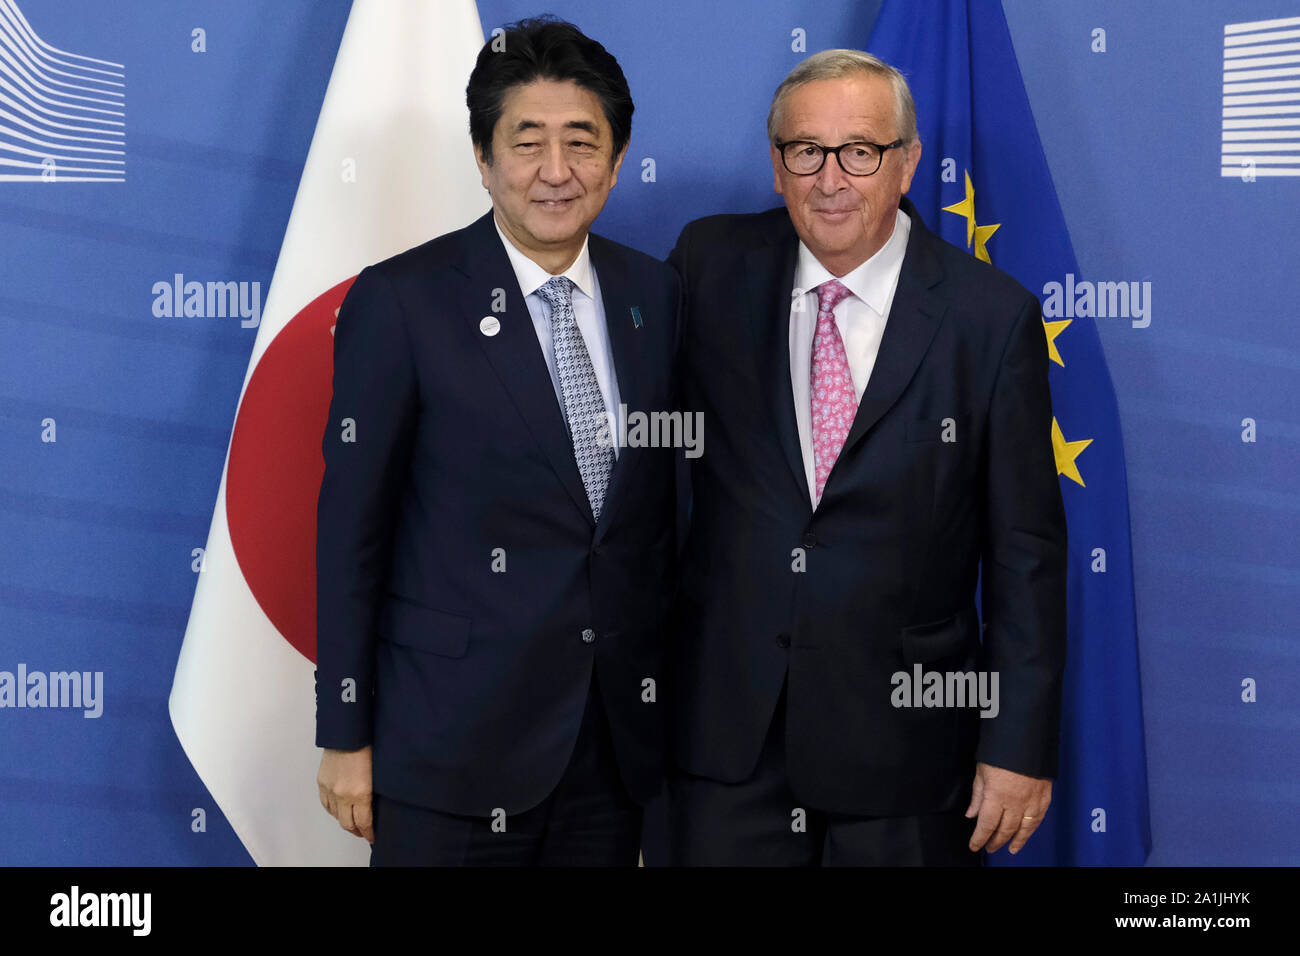 Brussels, Belgium. 27th September 2019. EU Commission President Jean-Claude Juncker (R) welcomes Japan's Prime Minister Shinzo Abe (L) ahead of a working lunch. Credit: ALEXANDROS MICHAILIDIS/Alamy Live News Stock Photo